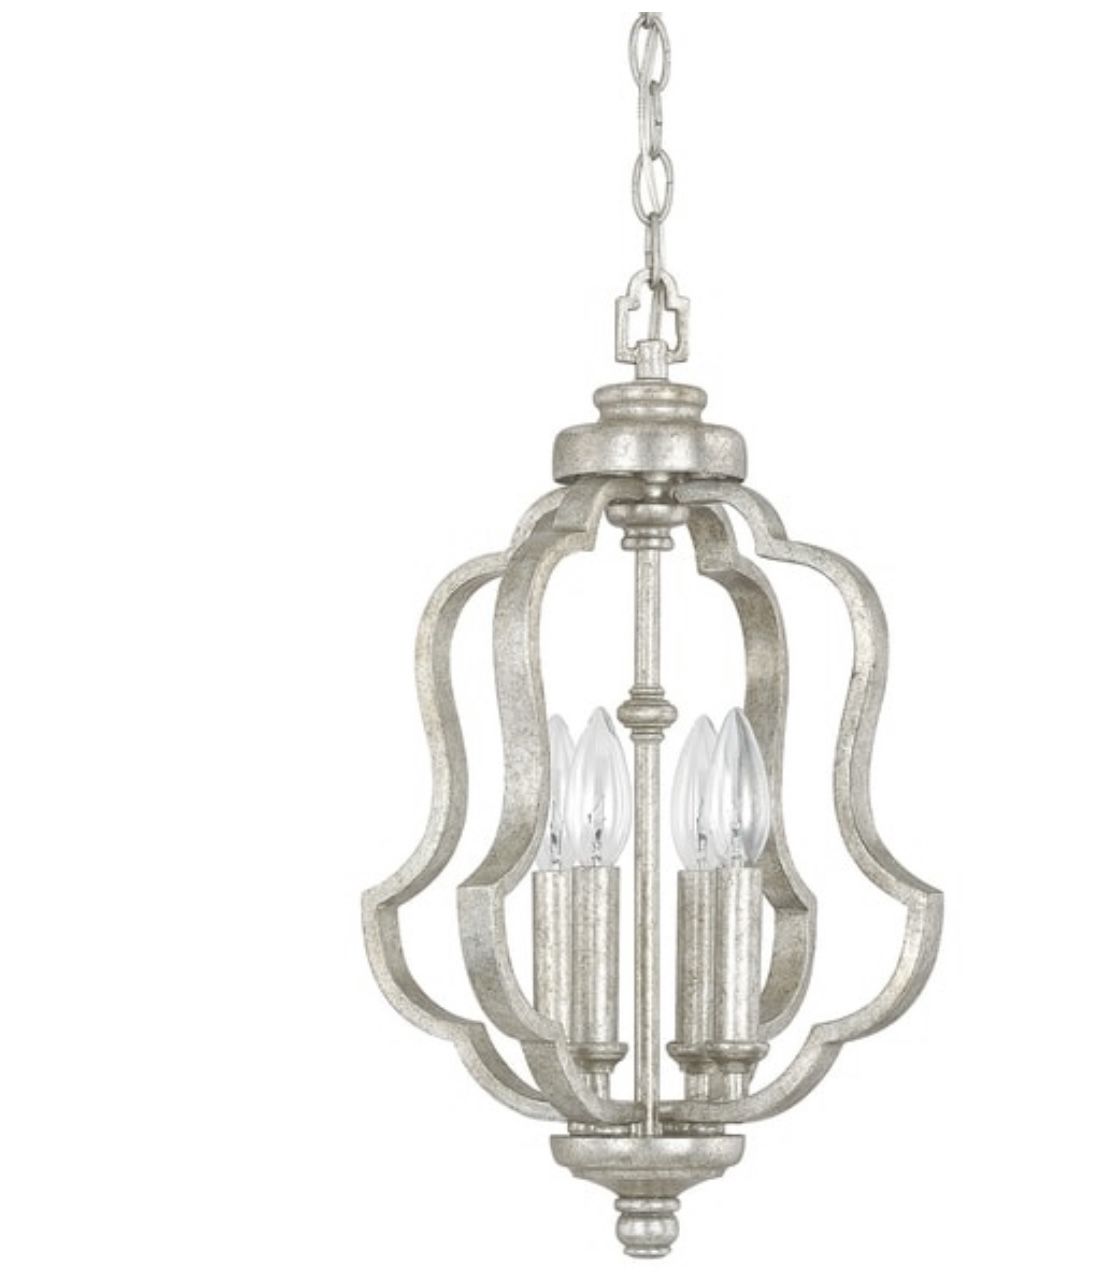 Blair 4 Light 12" Wide Taper Candle Pendant. Finish: Antique Silver. Height:18.5 in. Width:12 in. Open box inspected: MSRP $398.00. Our Price $201 + s